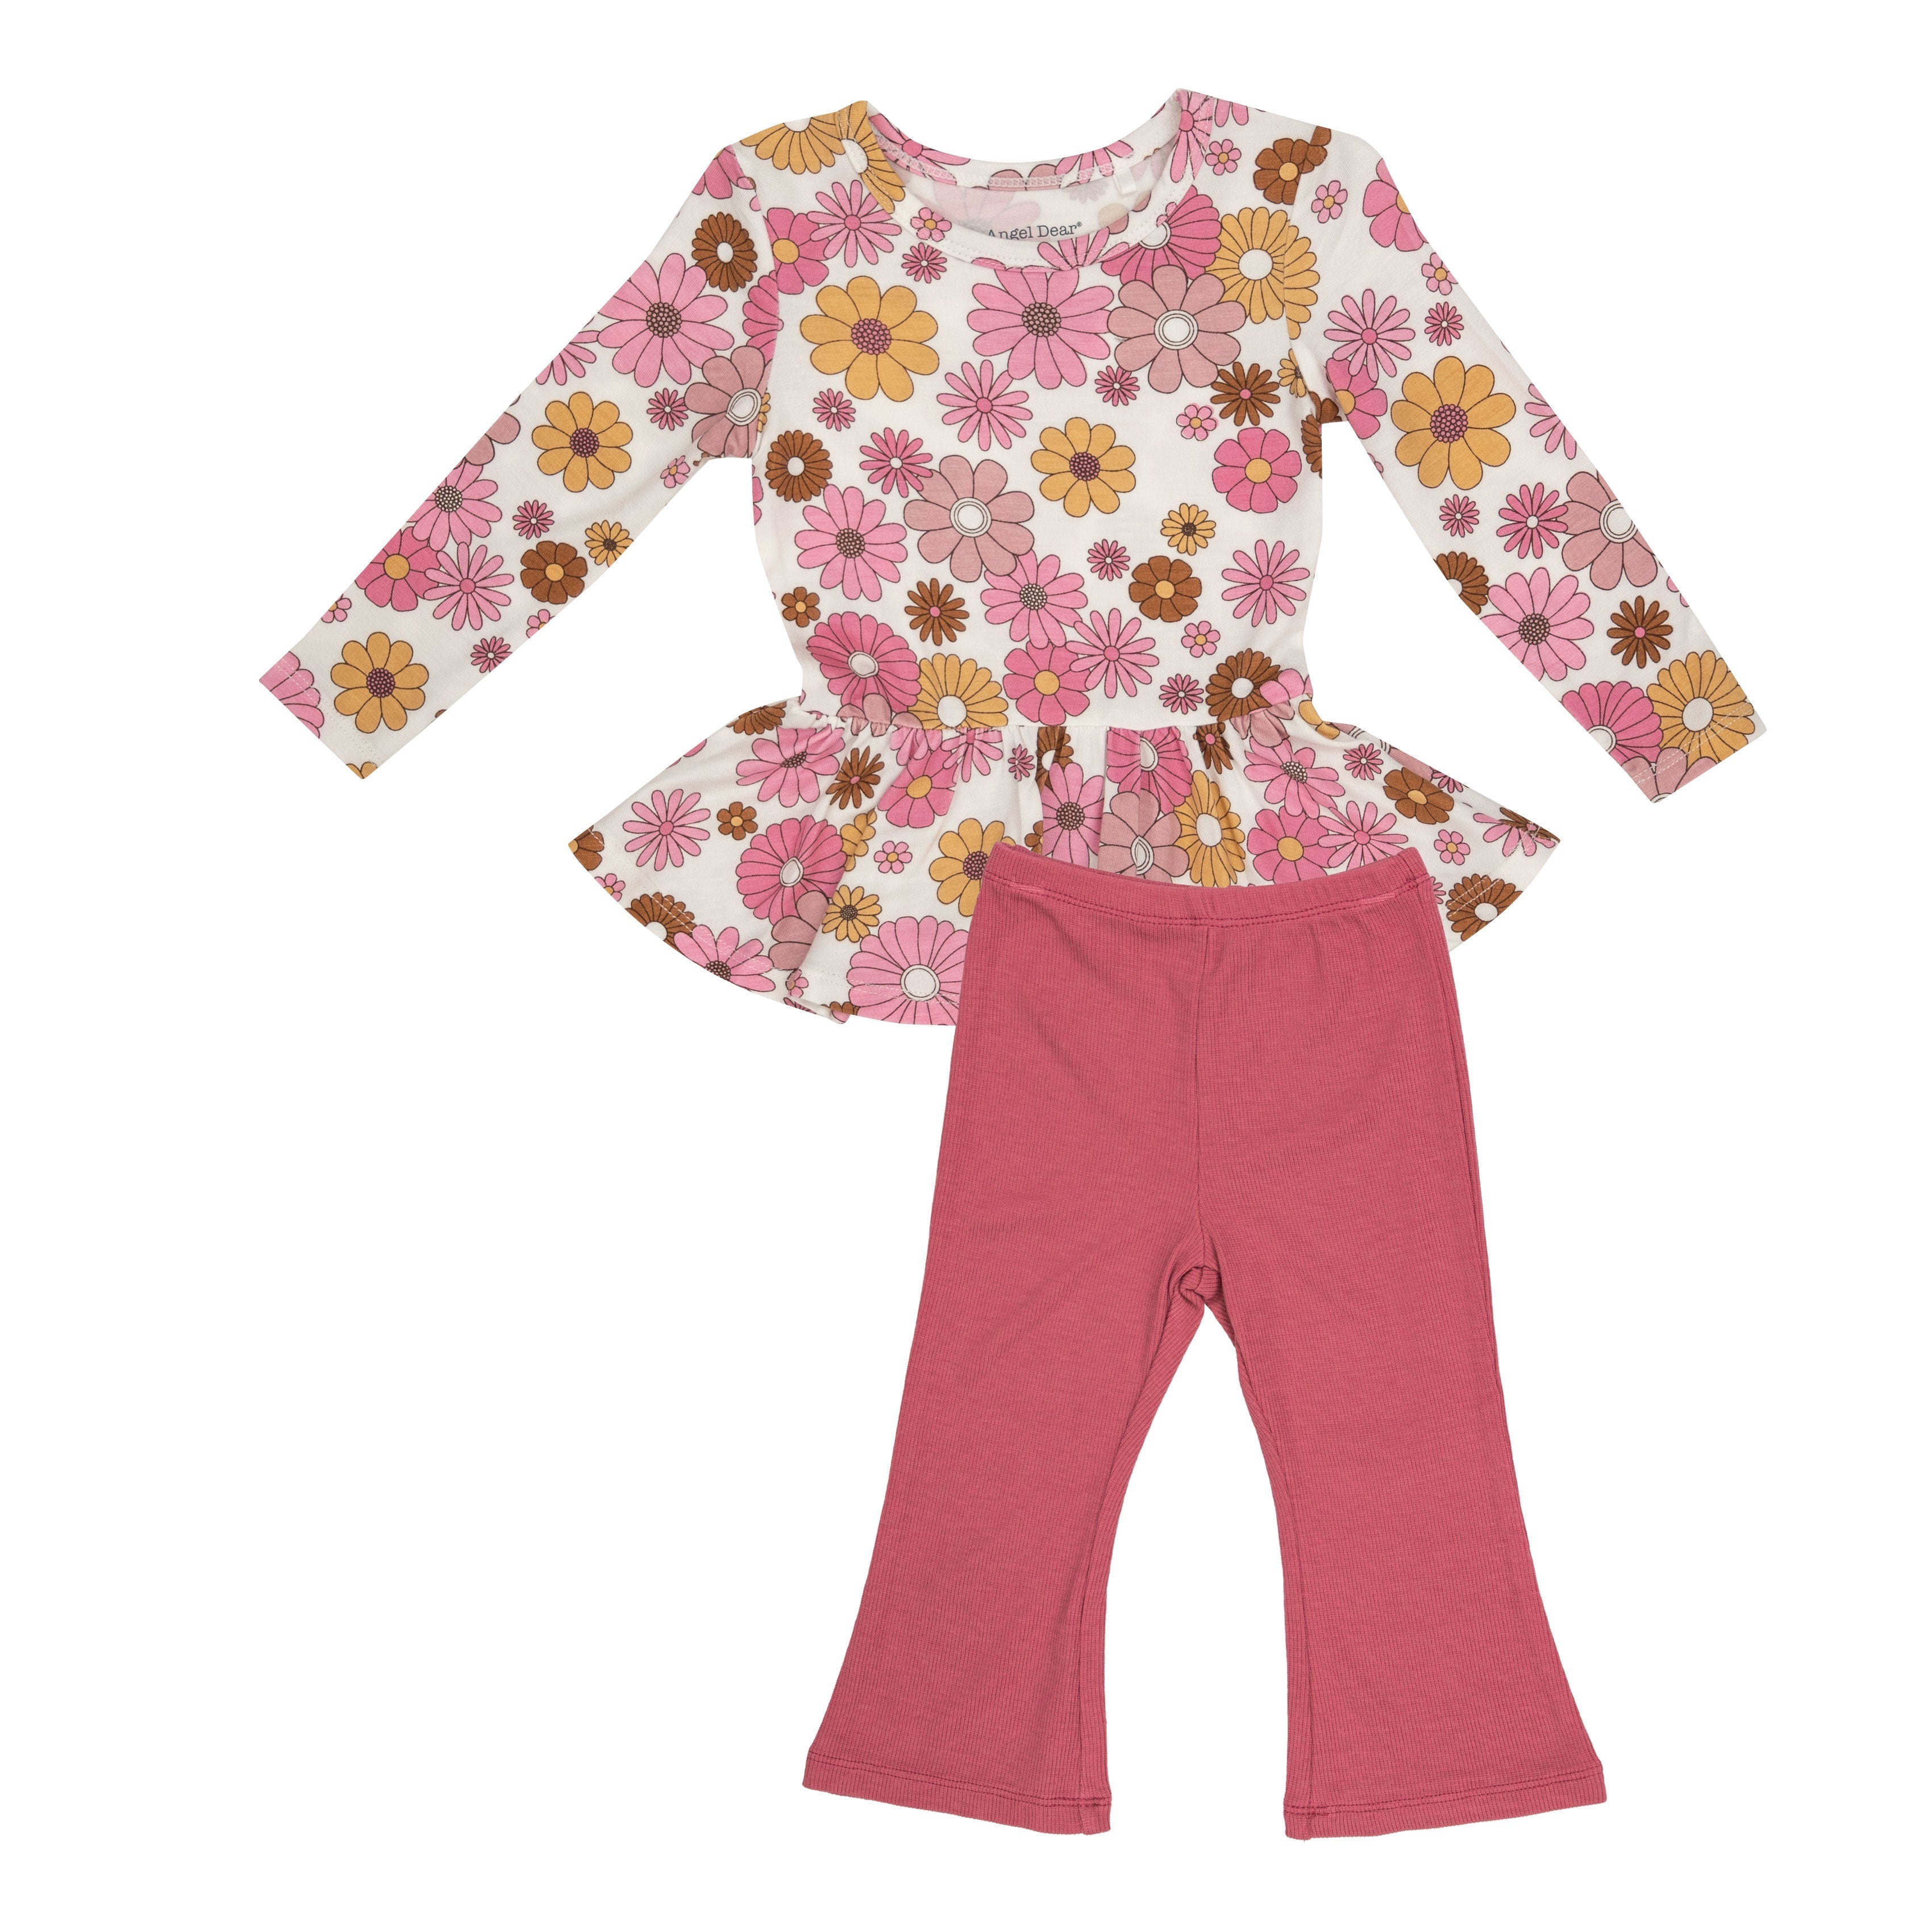 Peplum Top And Flare Pant - Retro Floral